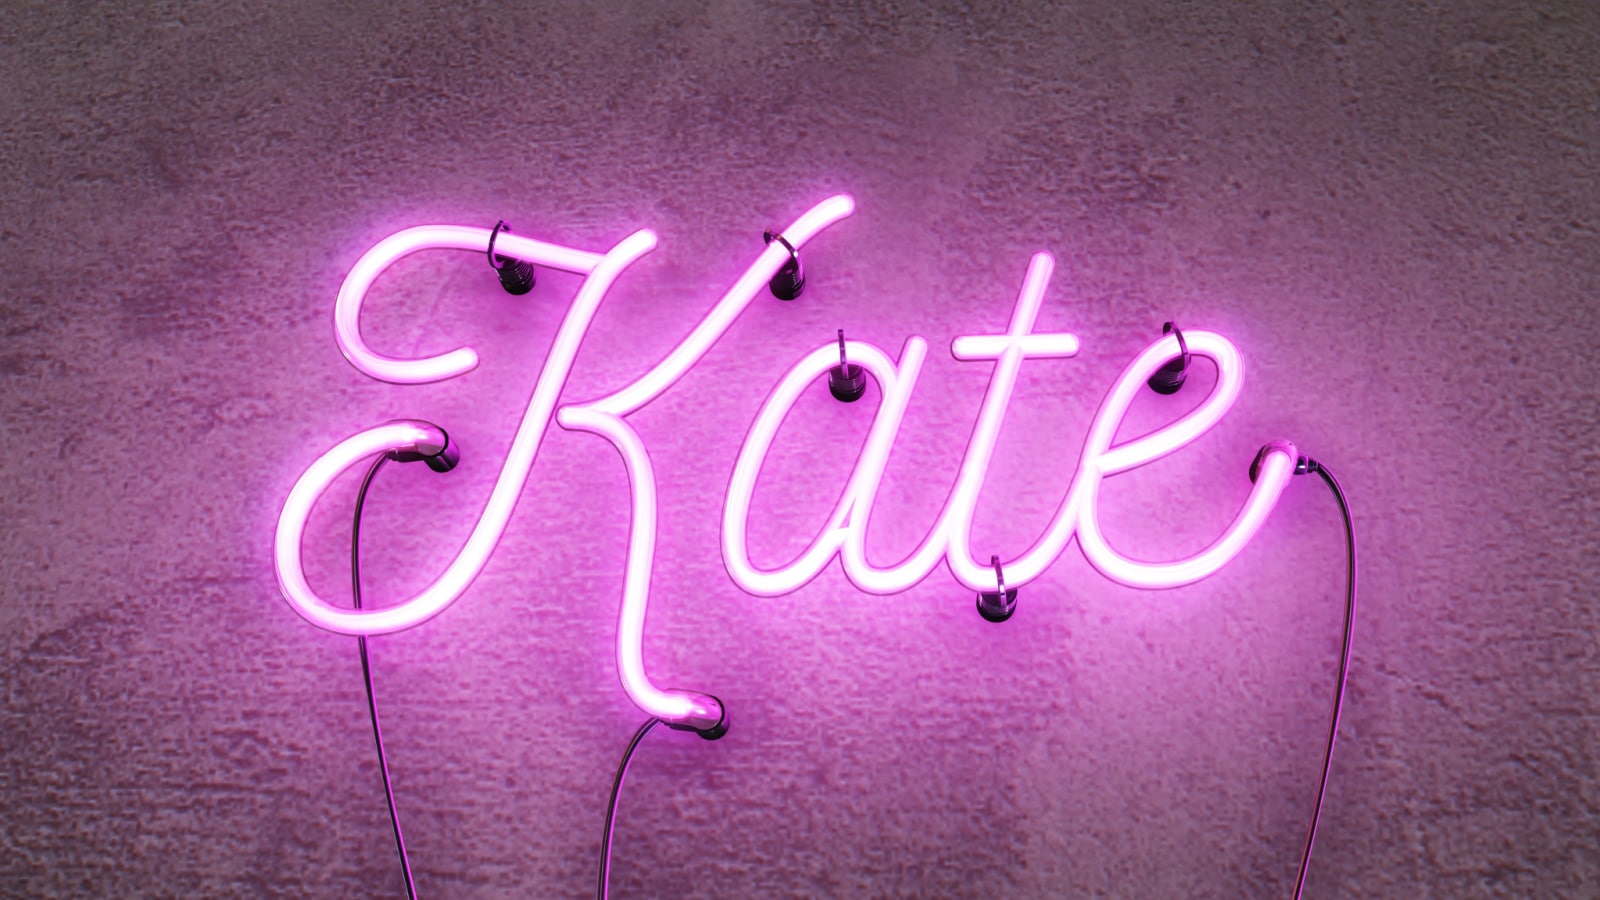 Bright pink neon sign spelling the girls name of Kate, on a concrete grunge background.